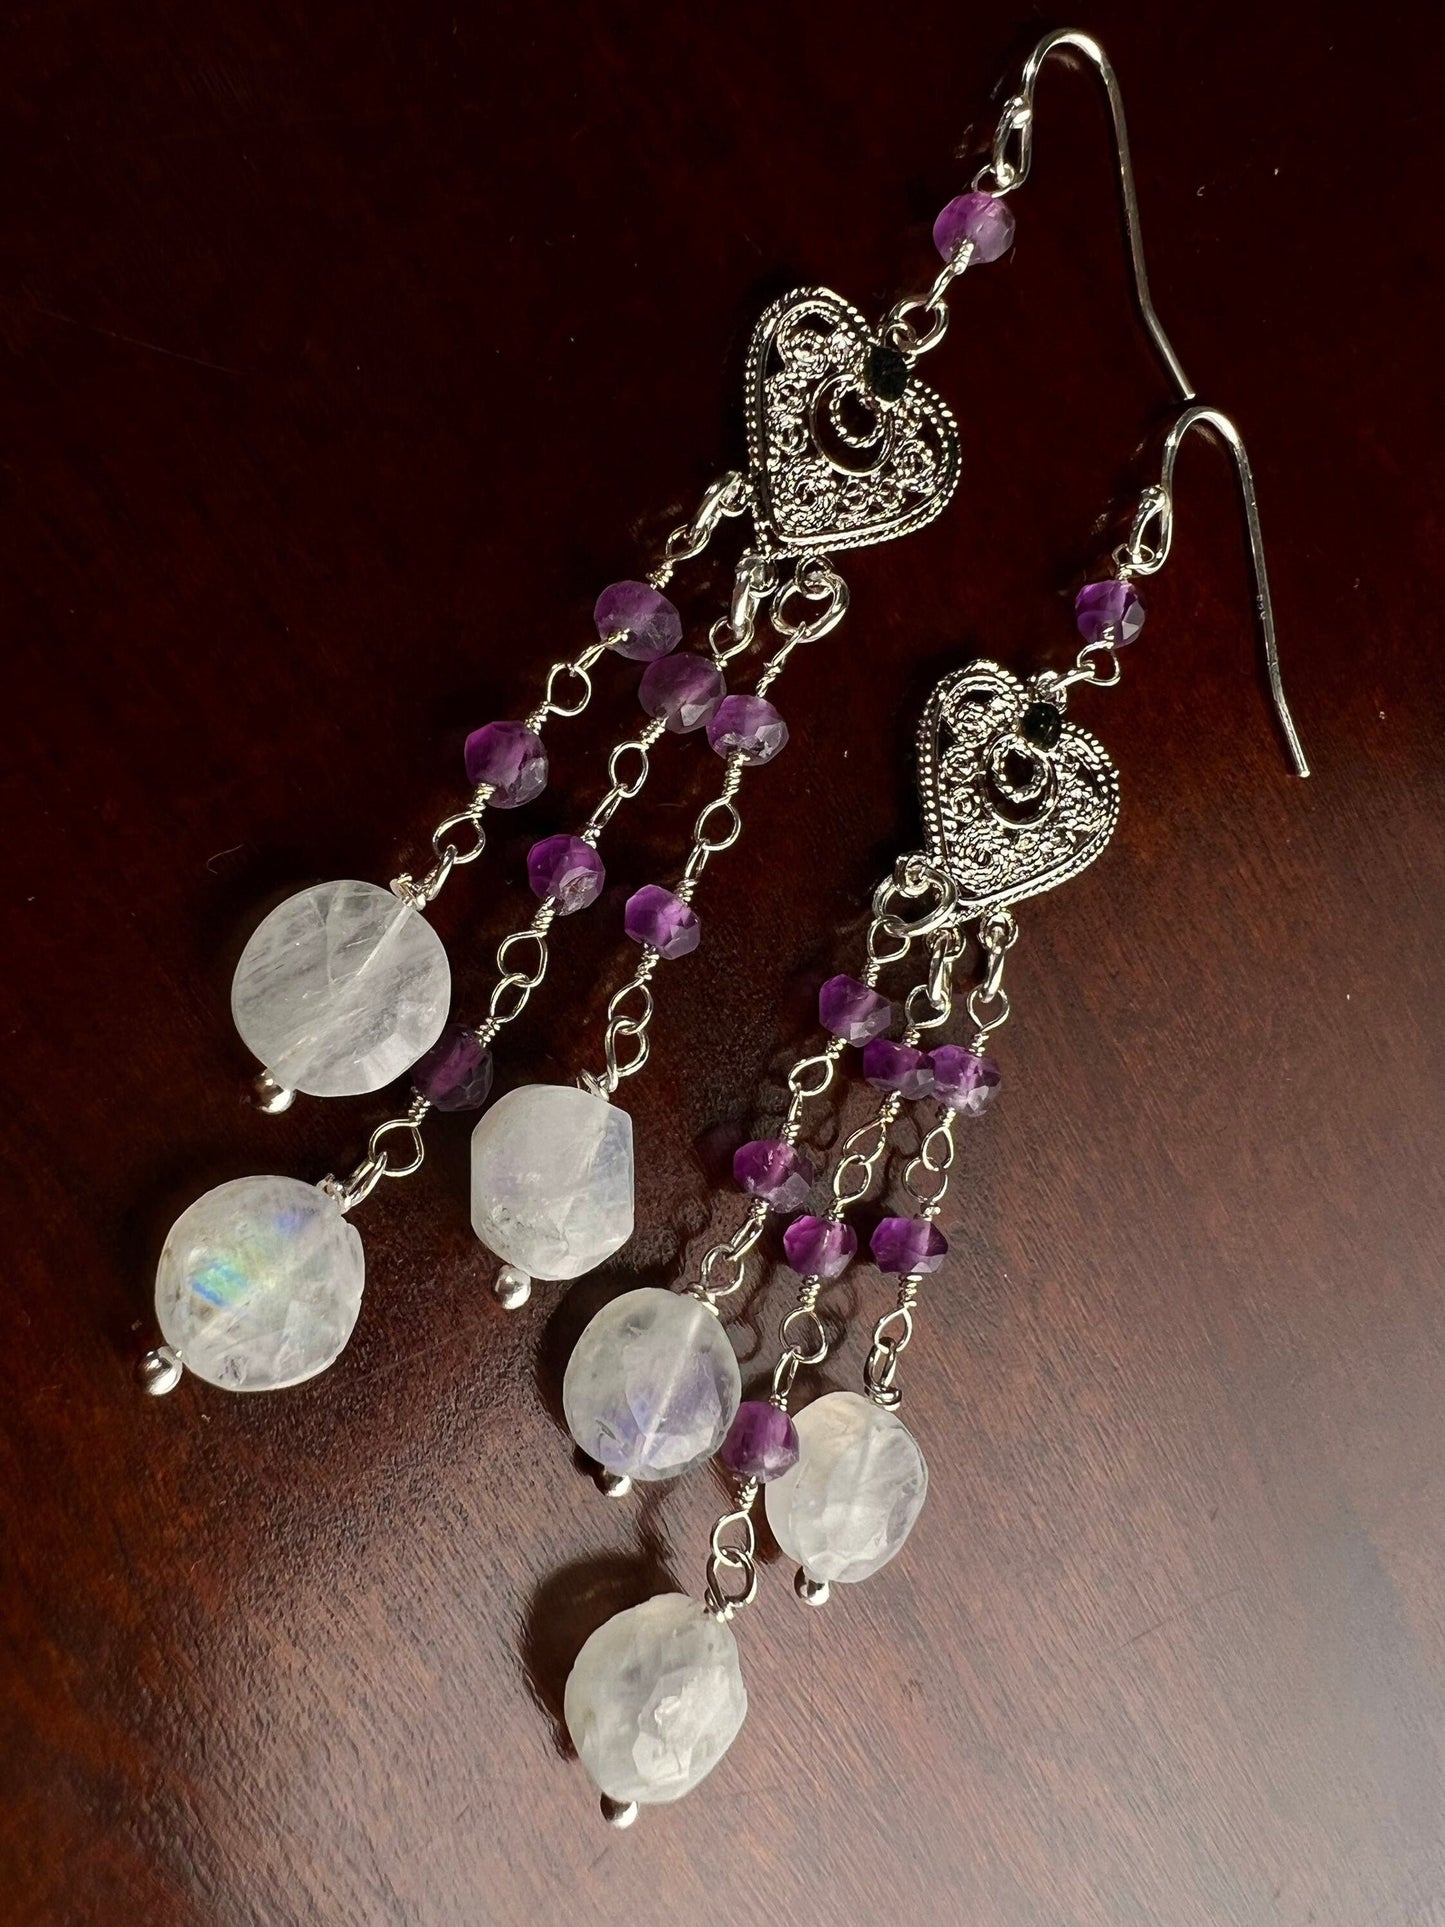 Natural Moonstone Dangling with Natural Amethyst Filigree Chandelier Wire Wrapped 925 Sterling Silver Earrings, Handmade Gift for Her